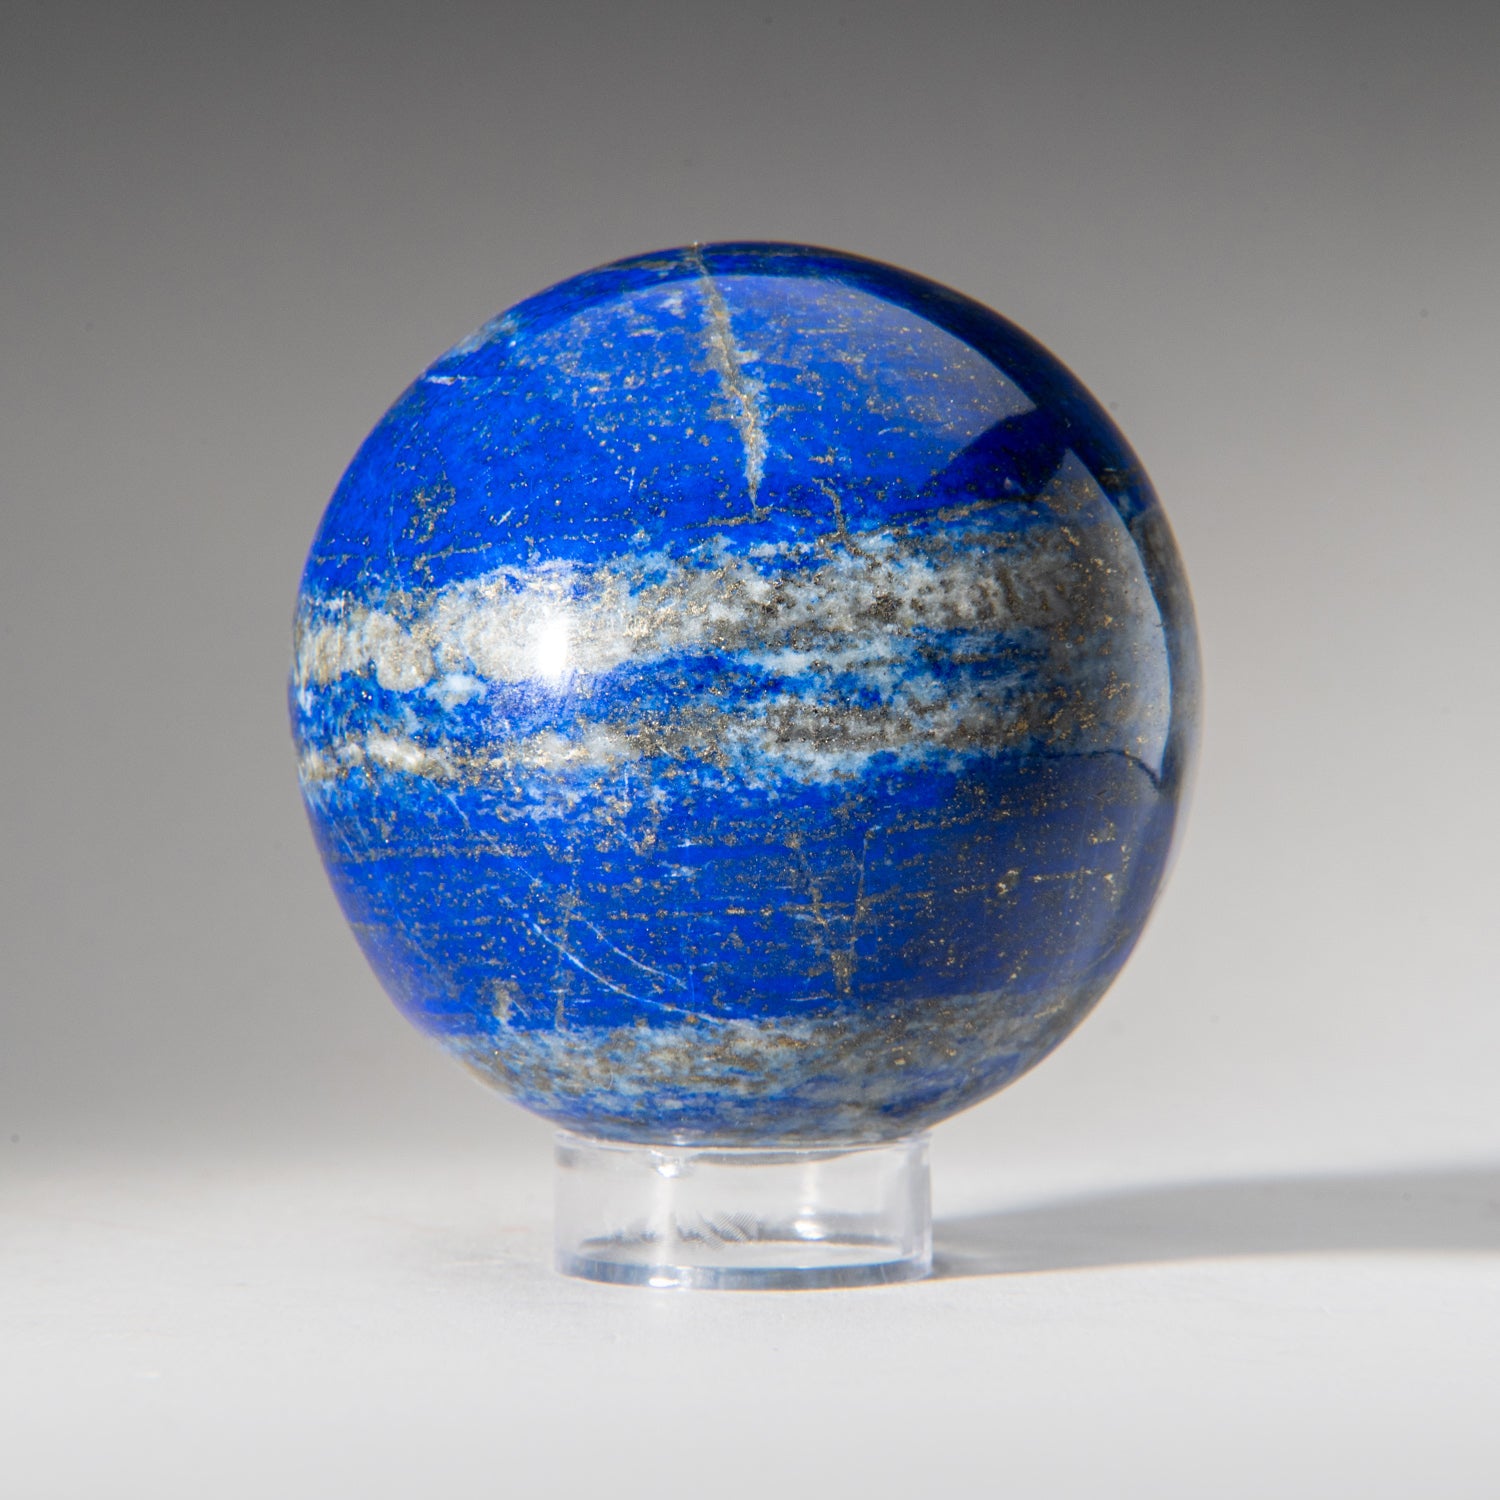 Genuine Polished Lapis Lazuli (3.25") Sphere from Afghanistan